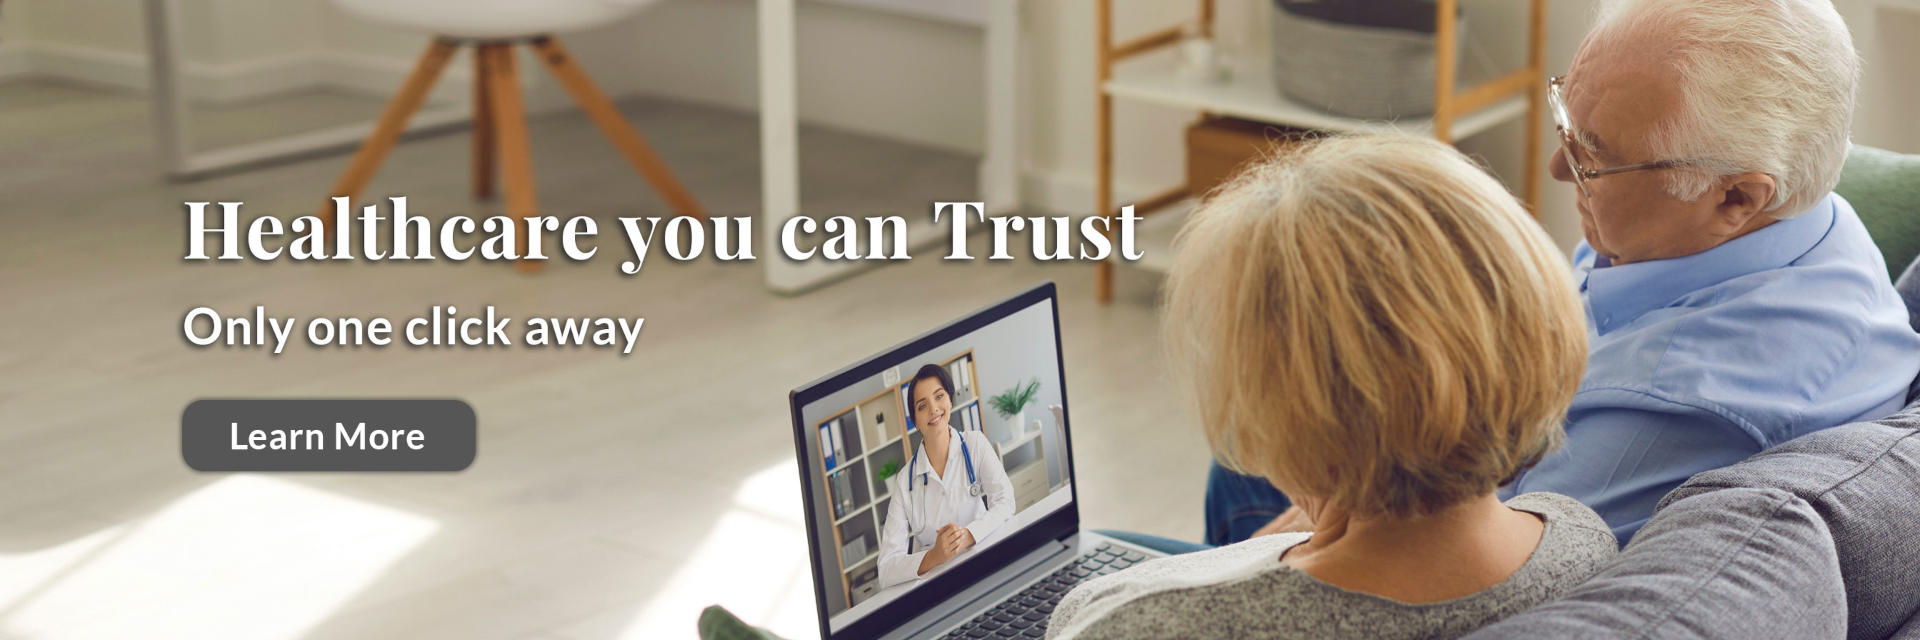 ]Healthcare you can Trust
Only one click away
(Learn More)